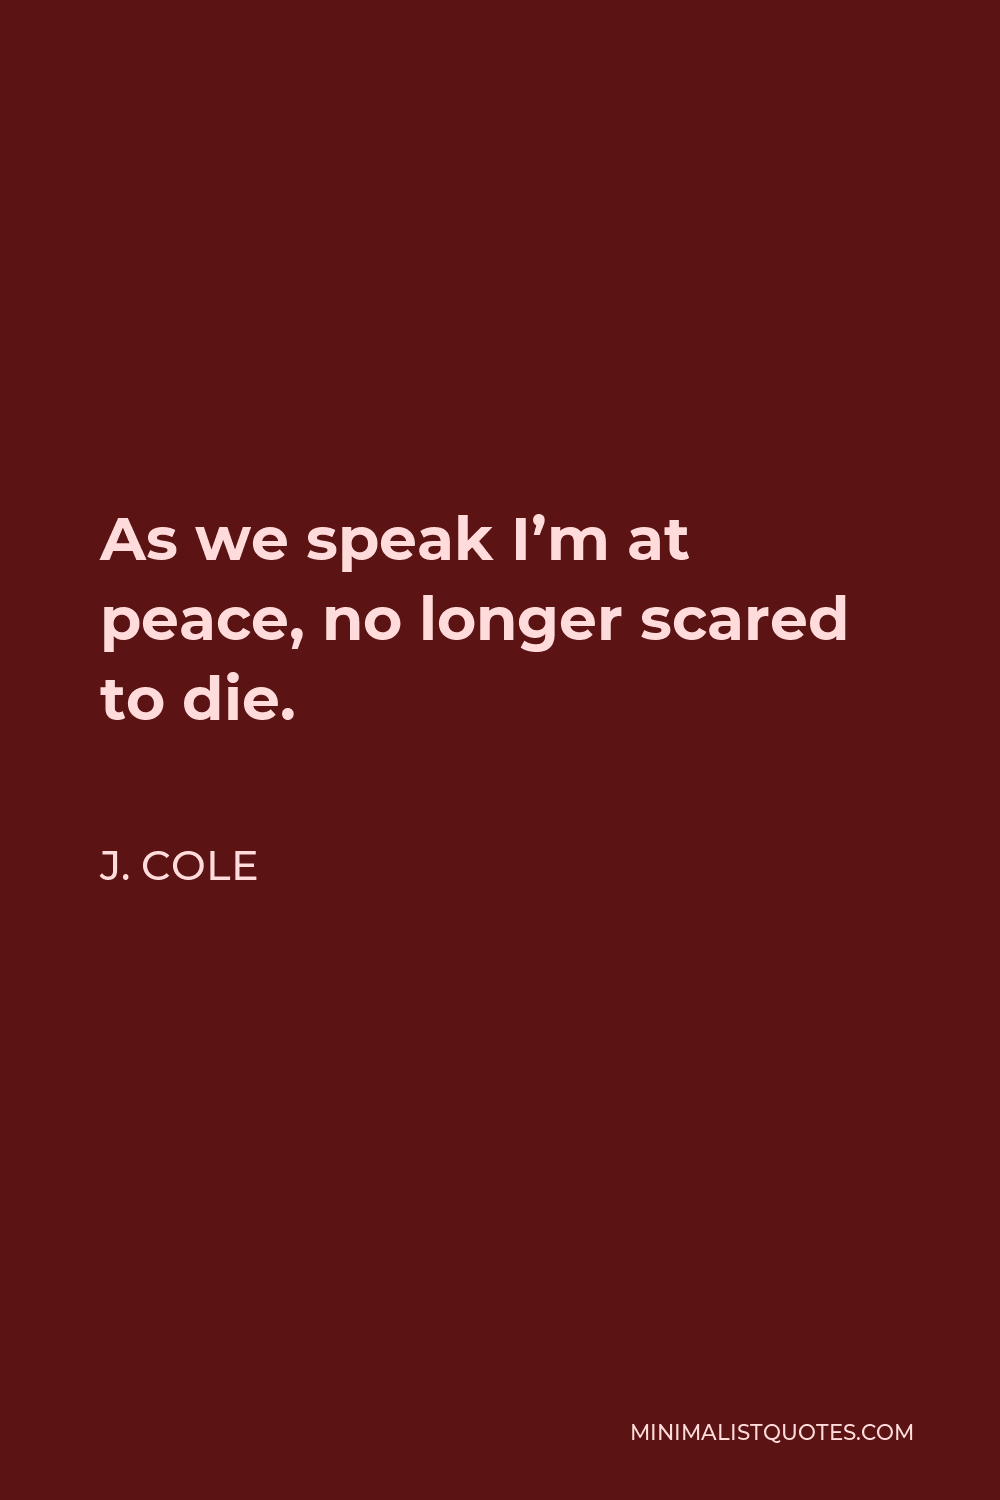 J. Cole Quote - As we speak I’m at peace, no longer scared to die.